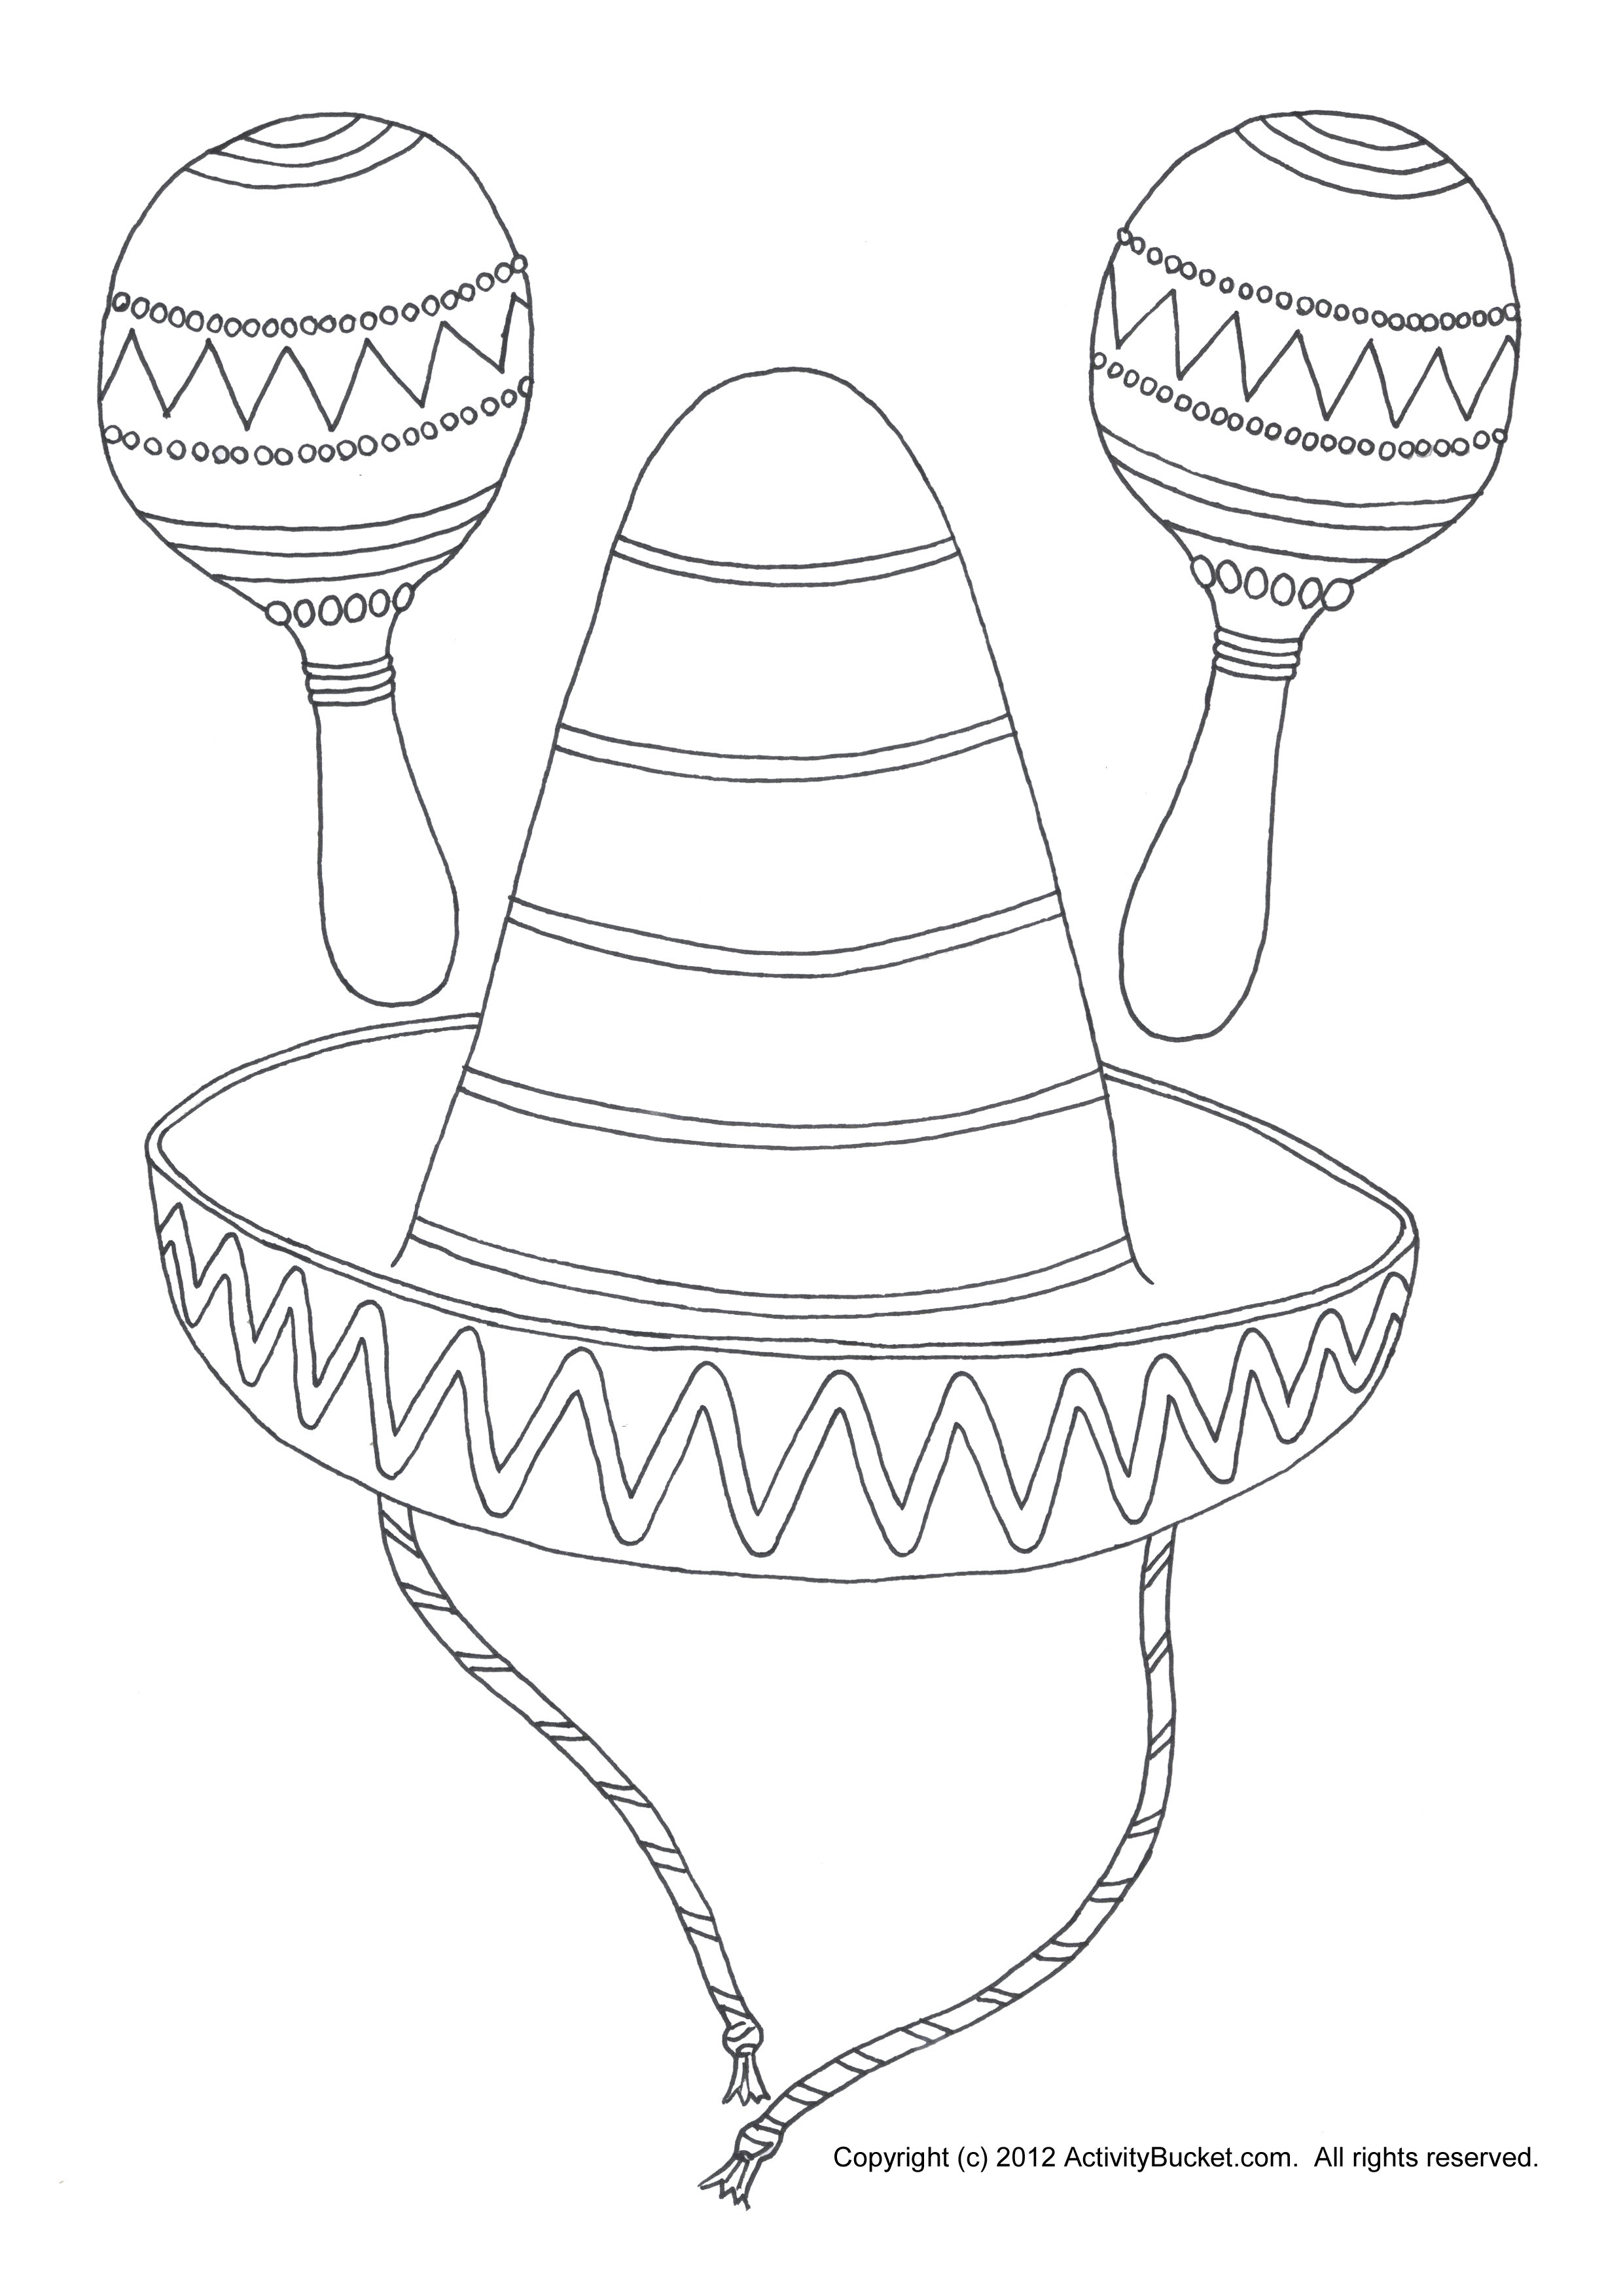 Mexican Sombrero Coloring Page at GetColorings.com | Free printable